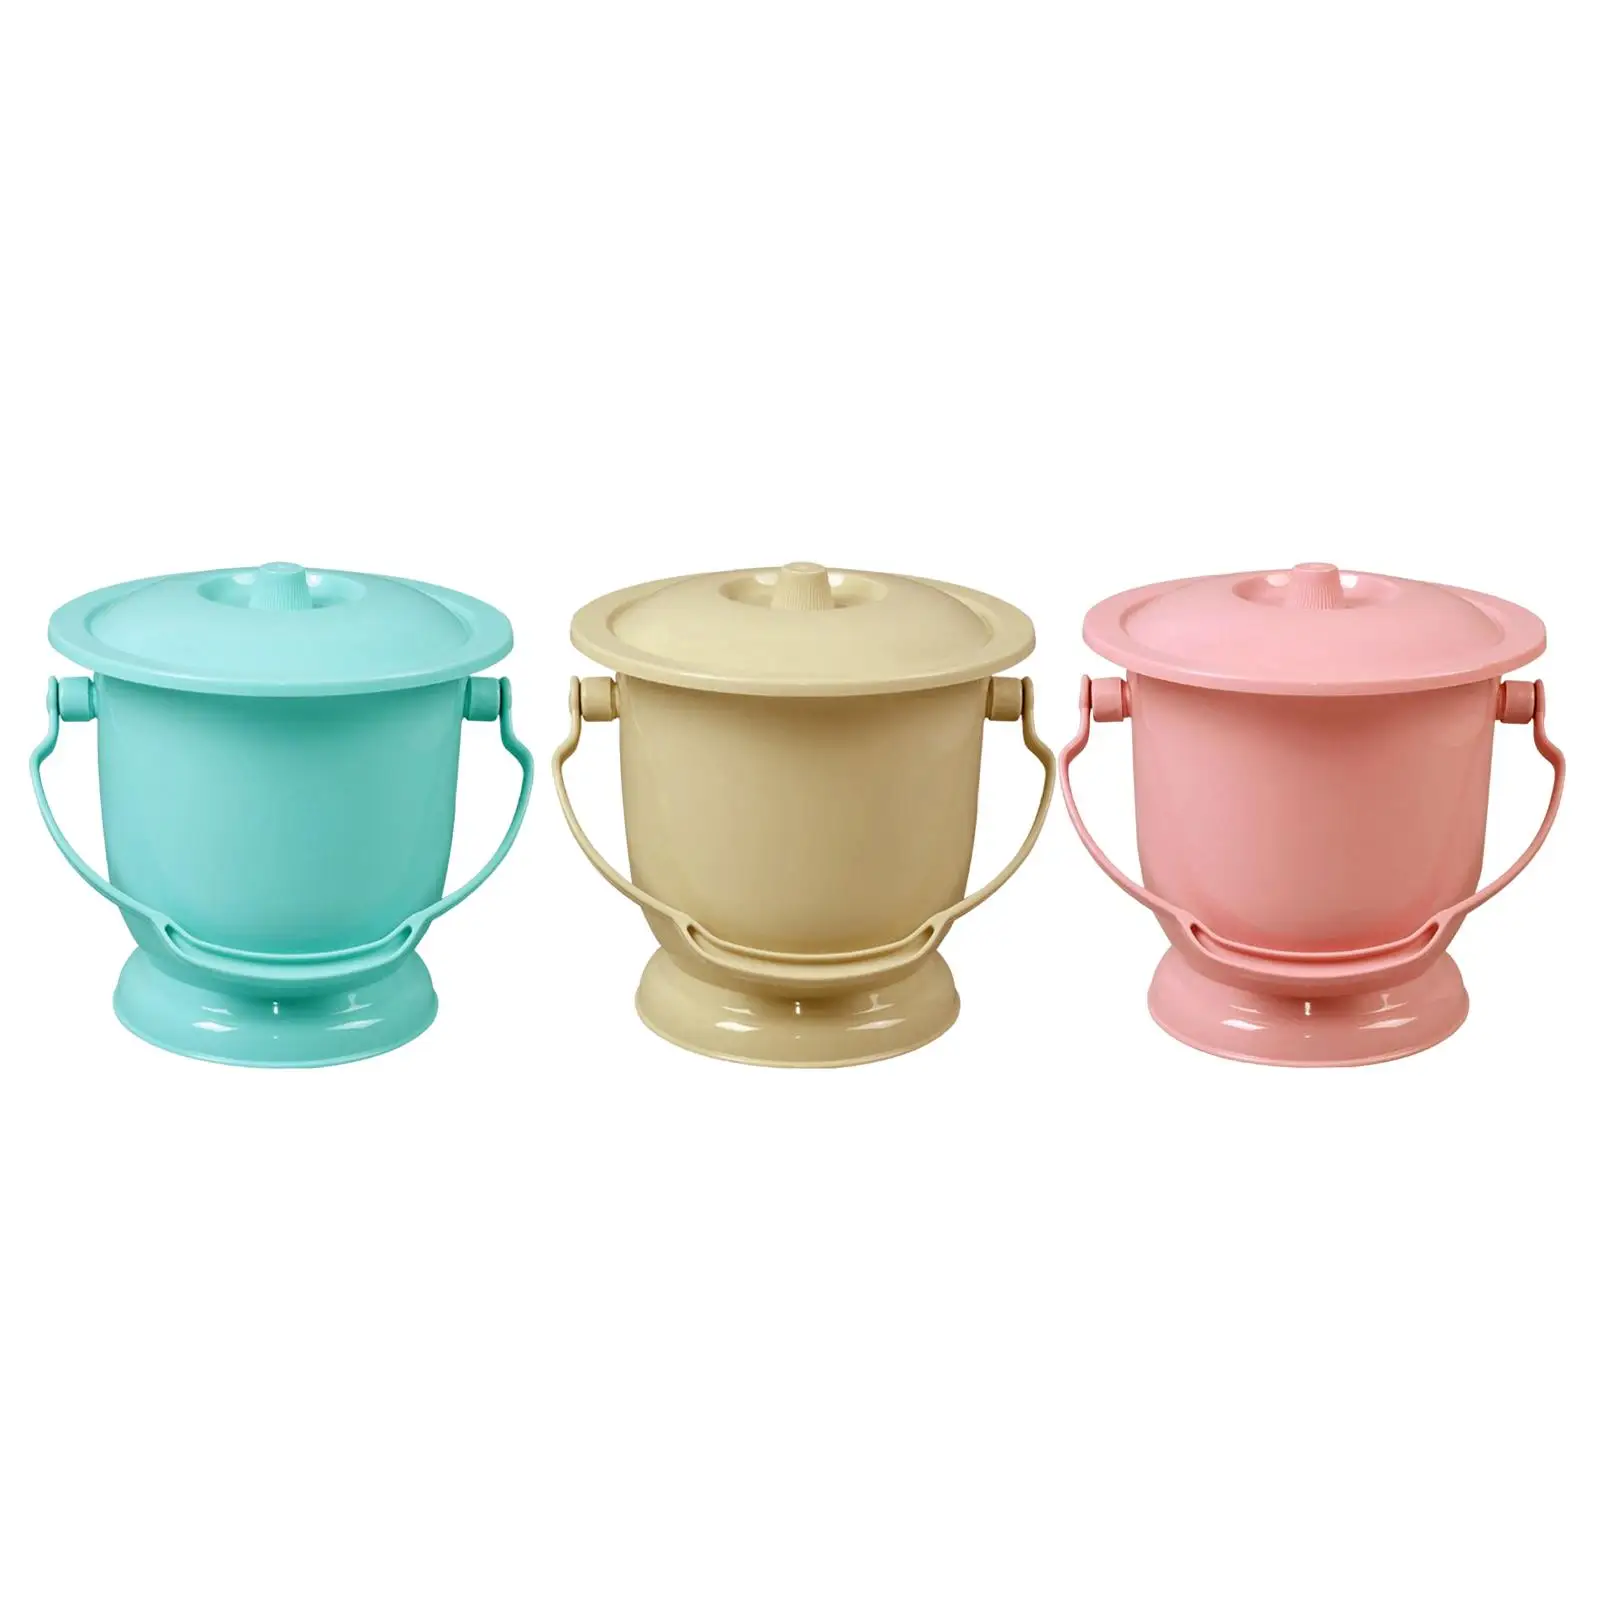 Chamber Pot with Lid Spittoon Bedpan Bright Color Portable Urinal Bottle